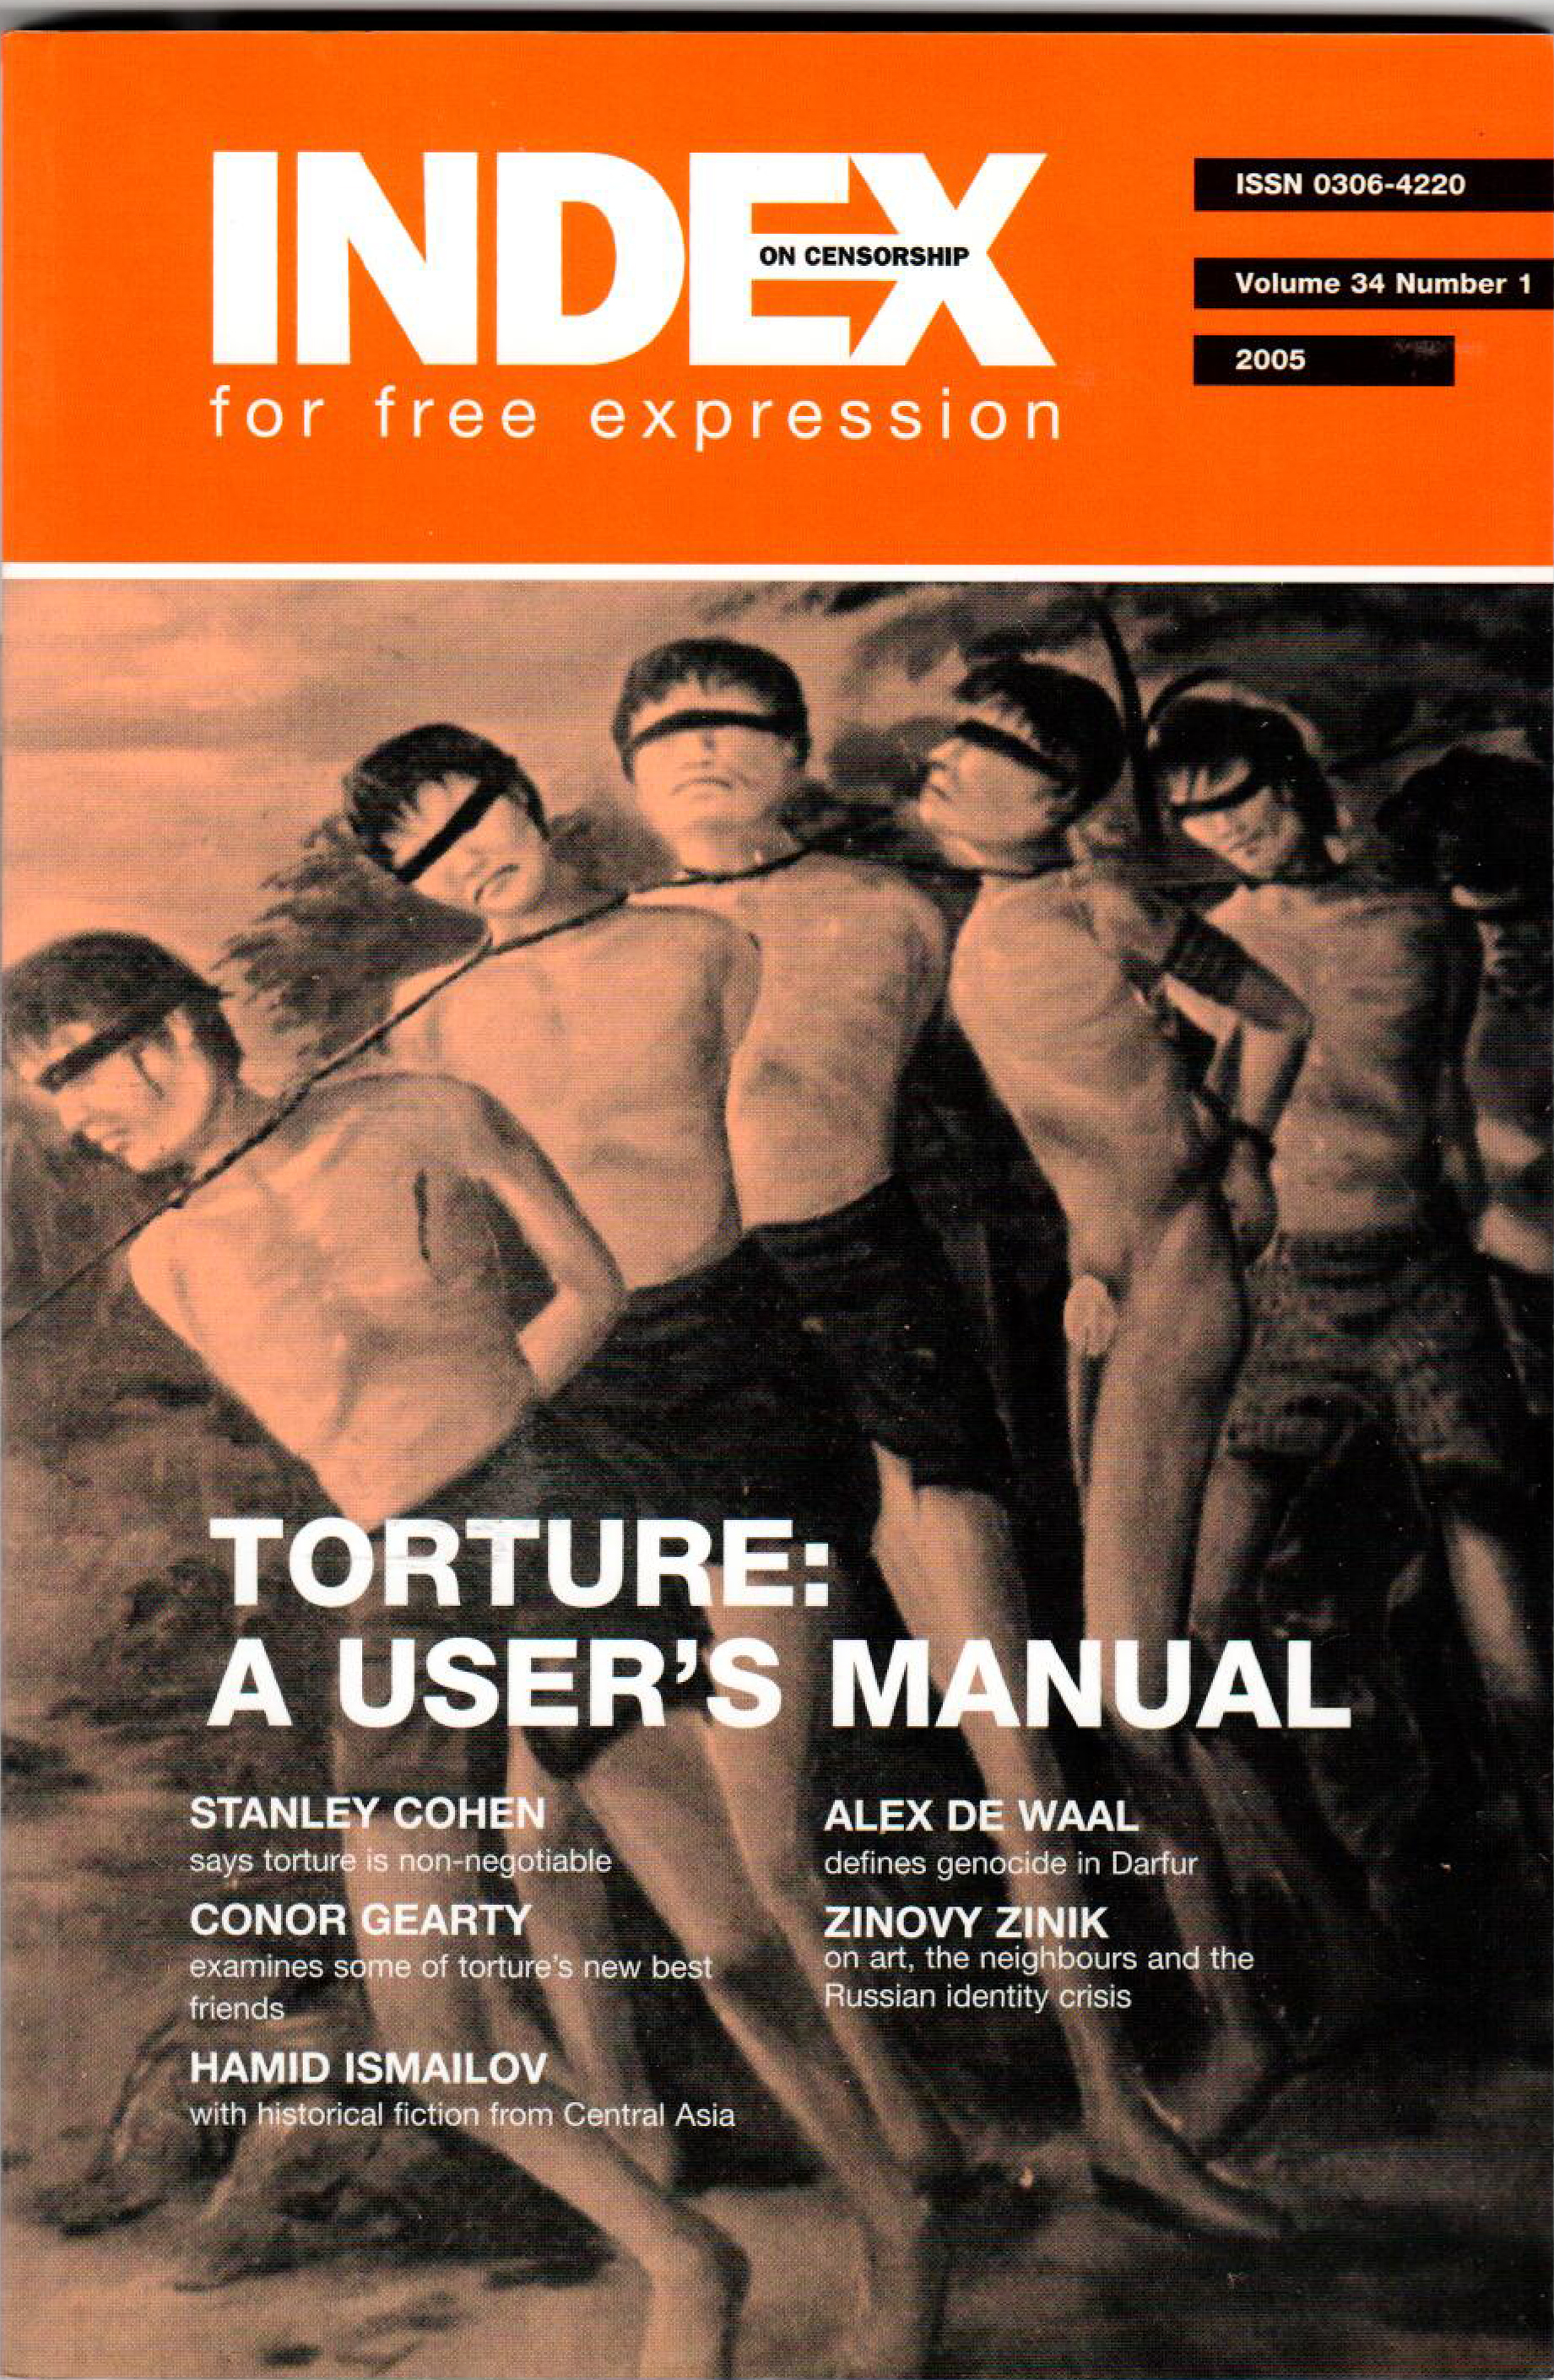 Torture: A user’s manual